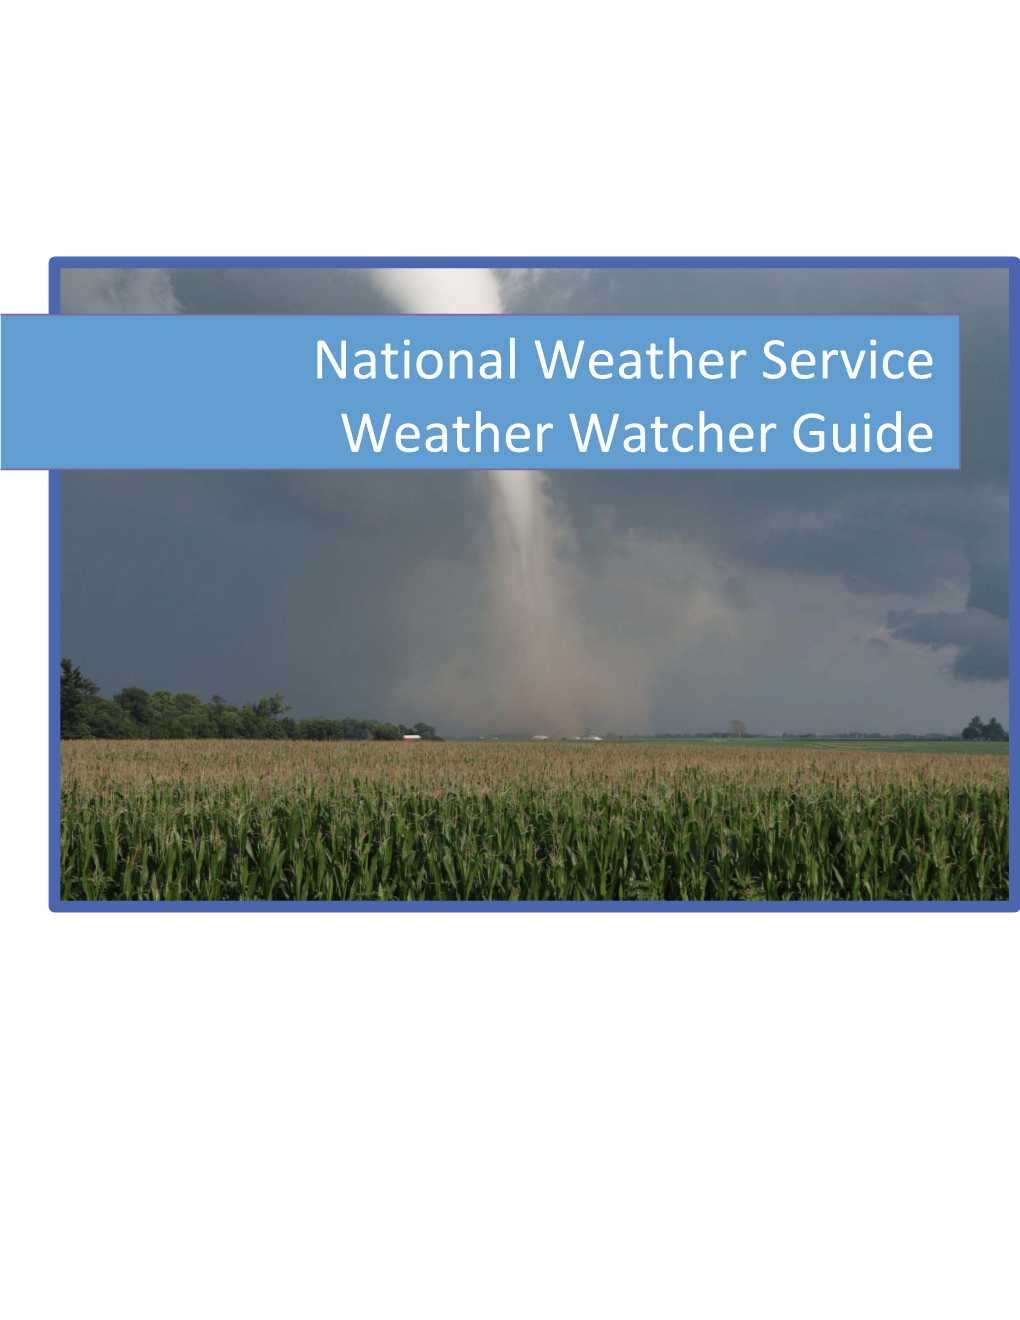 National Weather Service Weather Watcher Guide